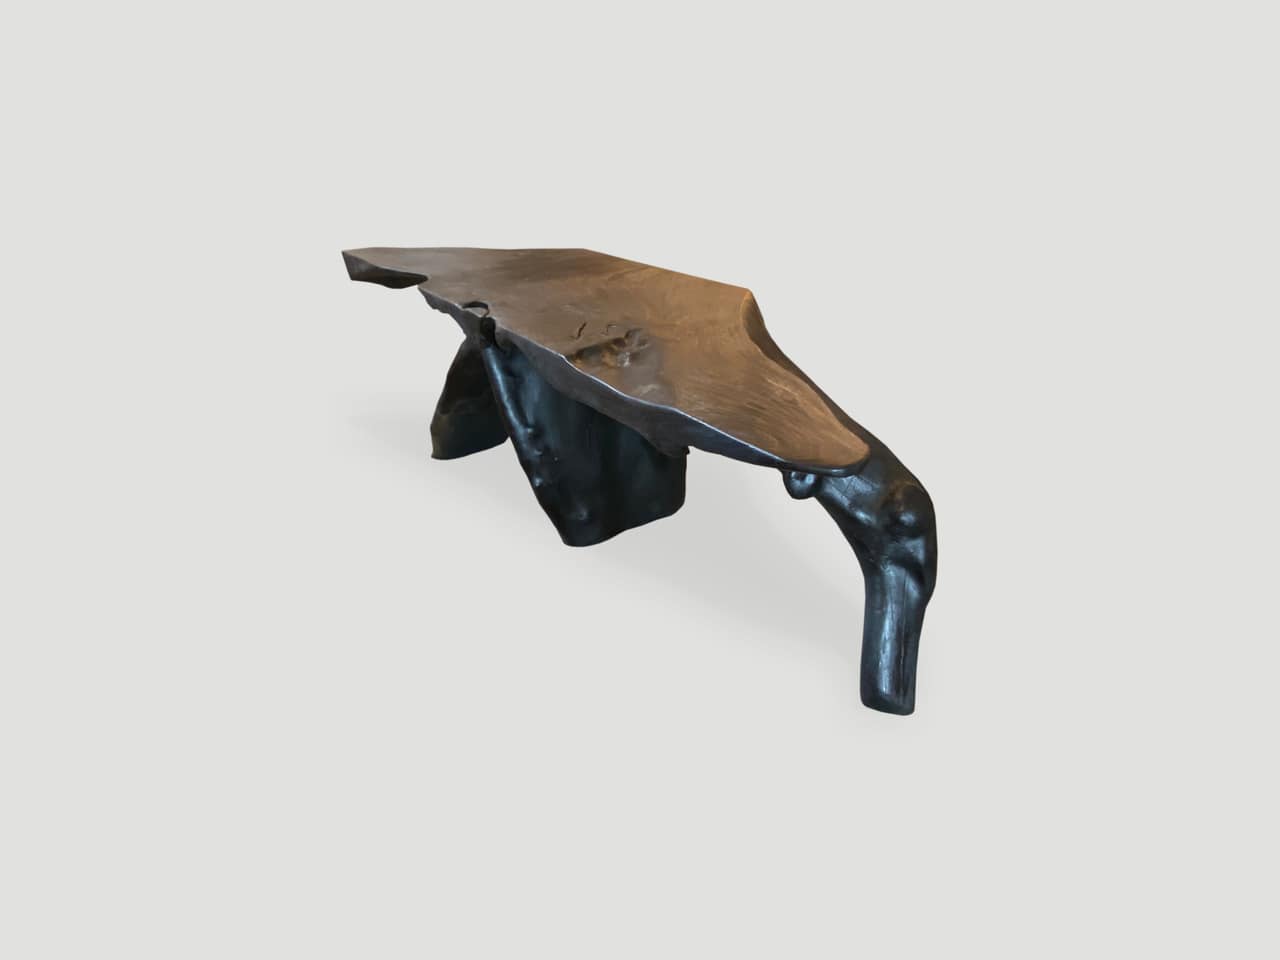 SCULPTURAL CHARRED TEAK ROOT CONSOLE TABLE